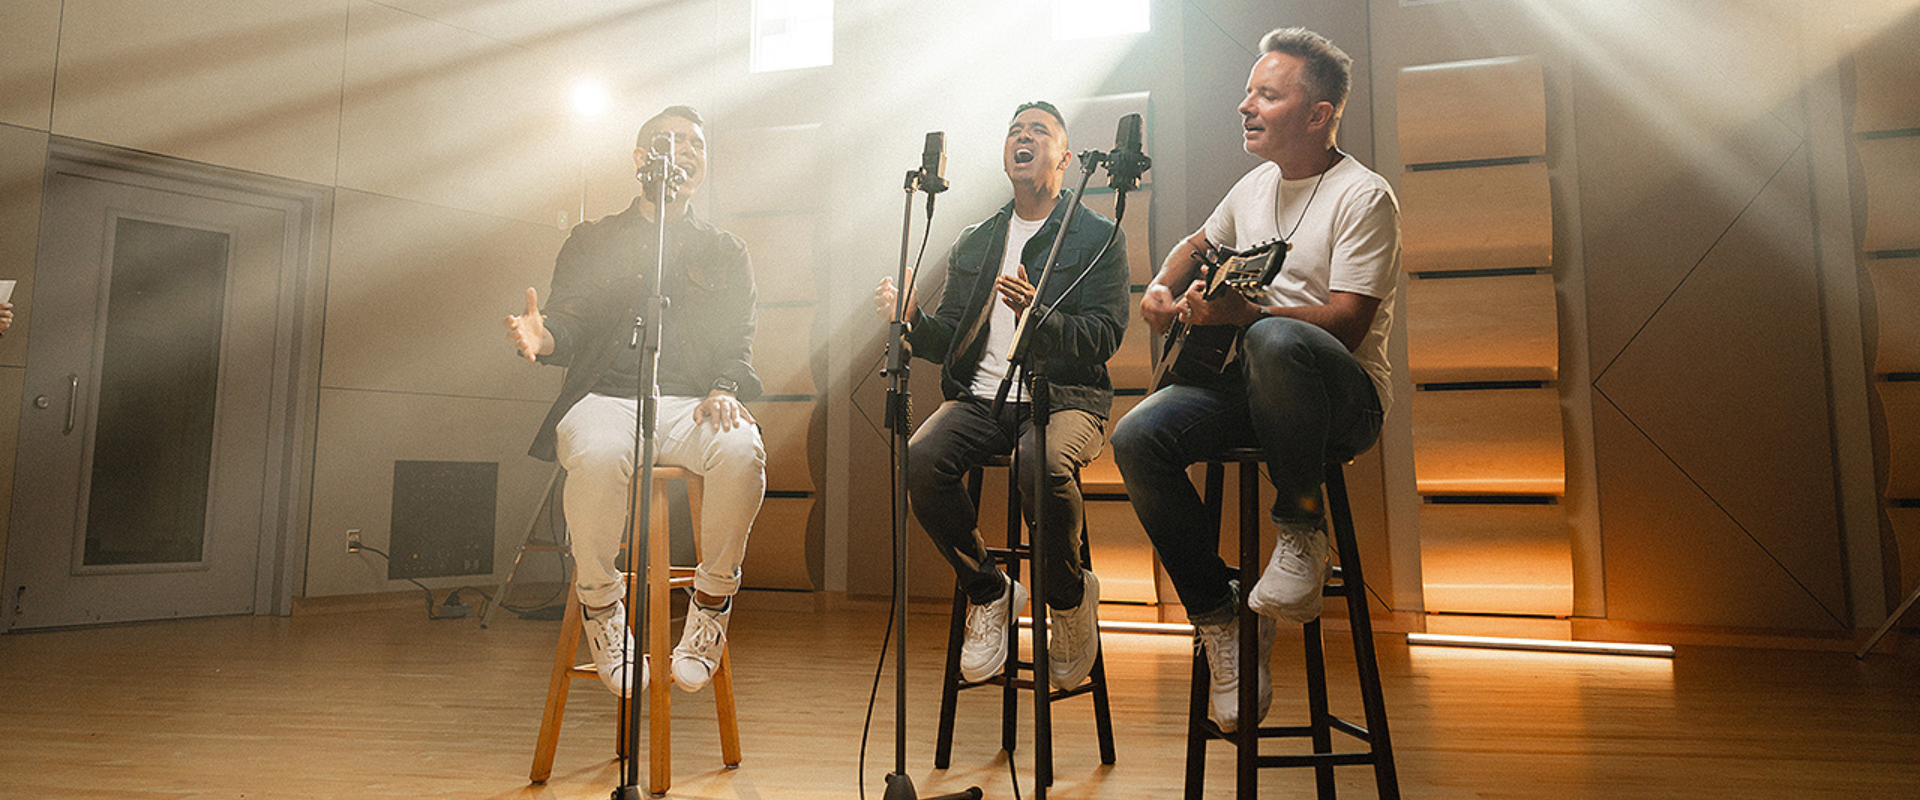 Chris Tomlin Releases Brand New Spanish Version Of “Holy Forever” With Miel San Marcos